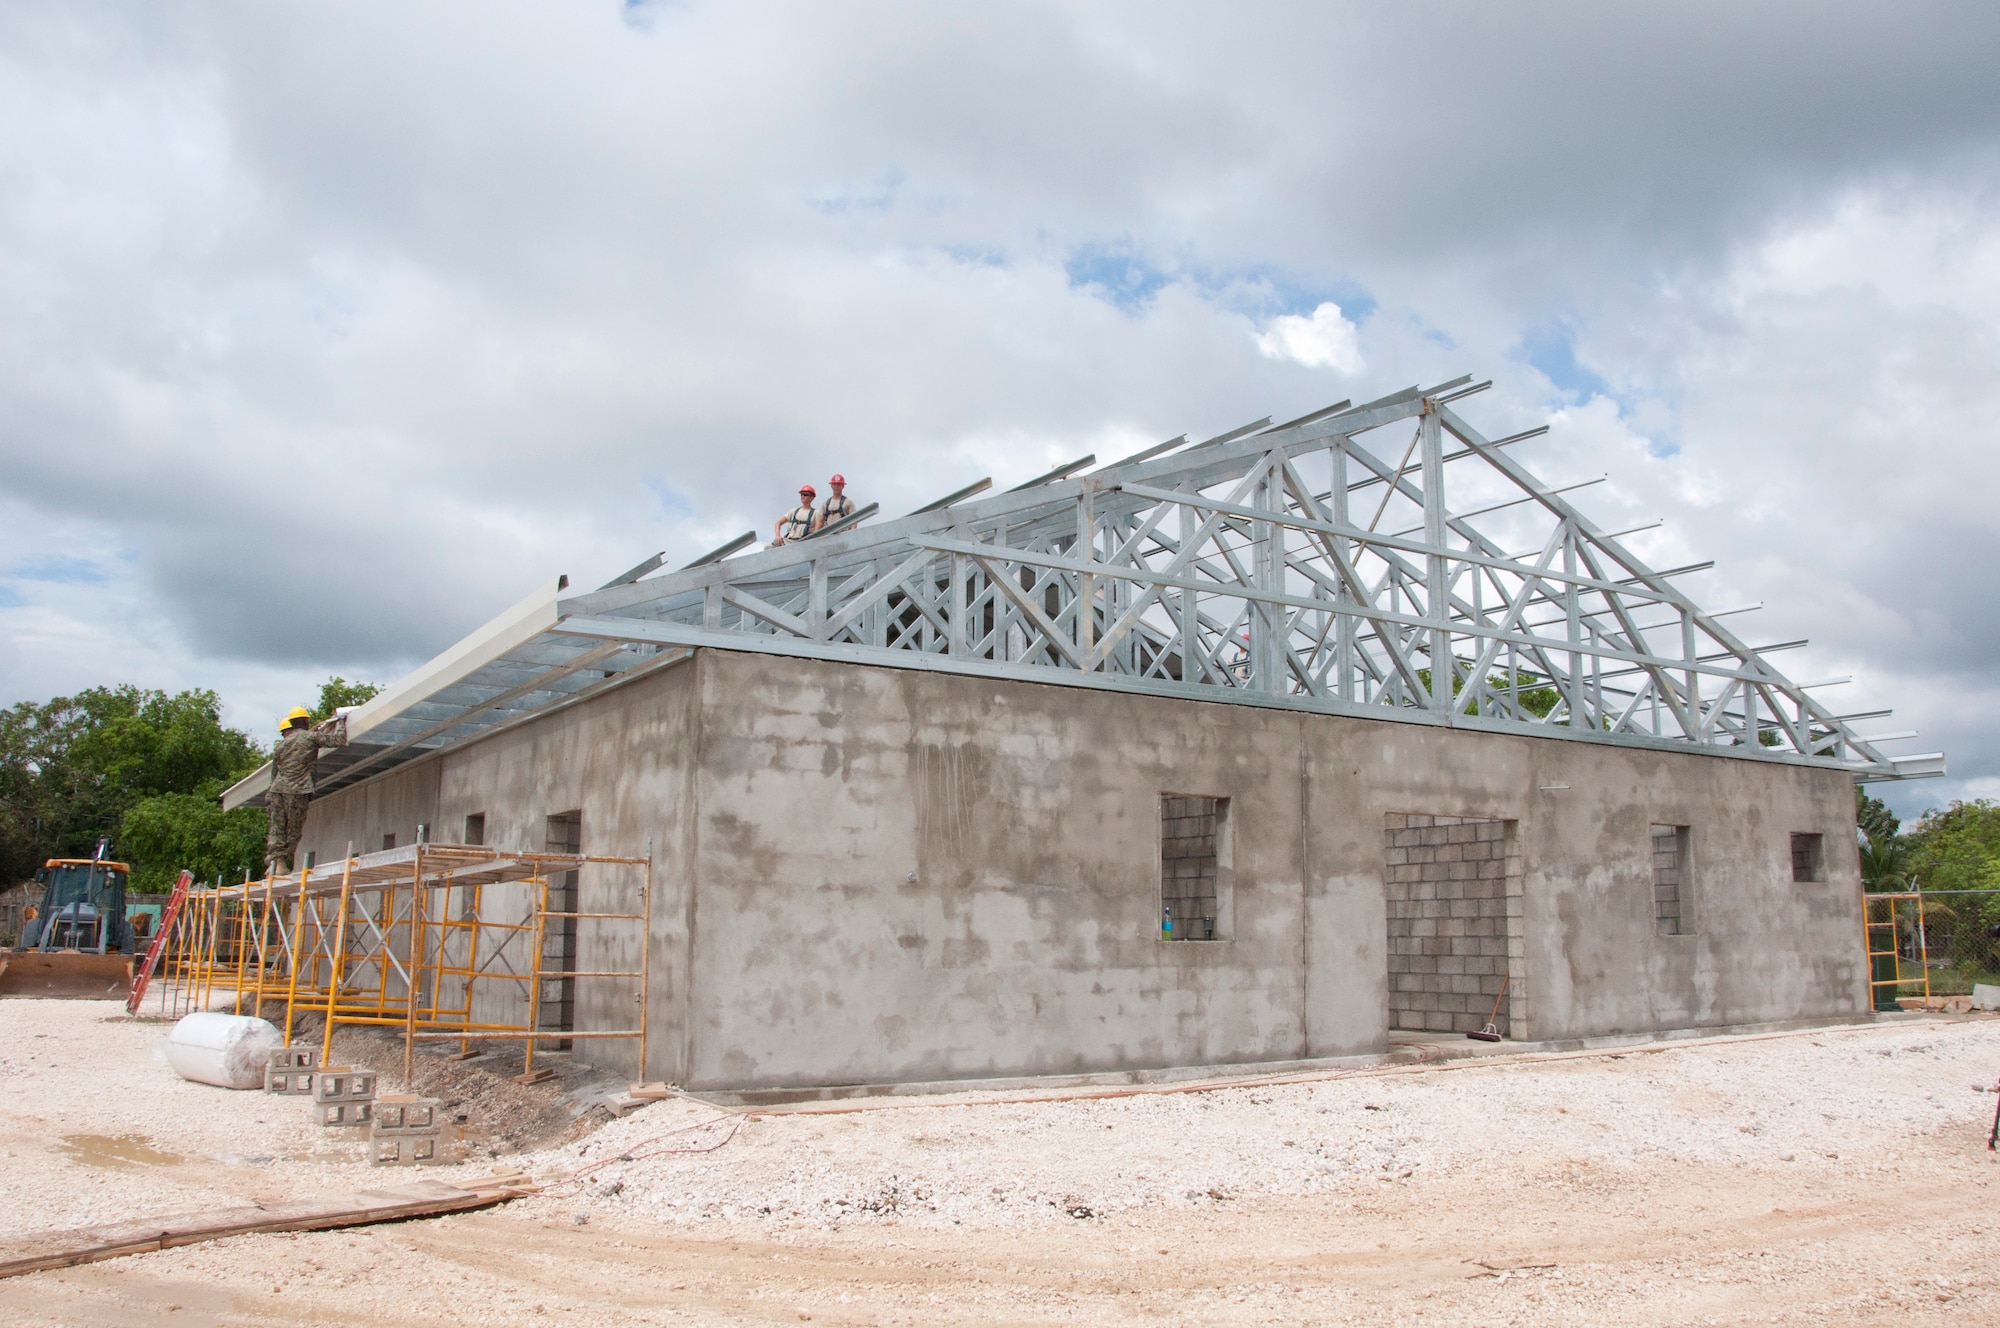 An addition to the Hattieville Government School is nearing completion after nearly six weeks of construction May 16, 2014, in Hattieville, Belize. Members of the Belize Defence Force Light Engineer Company have been working alongside U.S. Air Force, Army and Marine engineers on additions at four schools and one medical facility throughout Belize as part of New Horizons Belize 2014. (U.S. Air Force photo by Tech. Sgt. Kali L. Gradishar/Released)